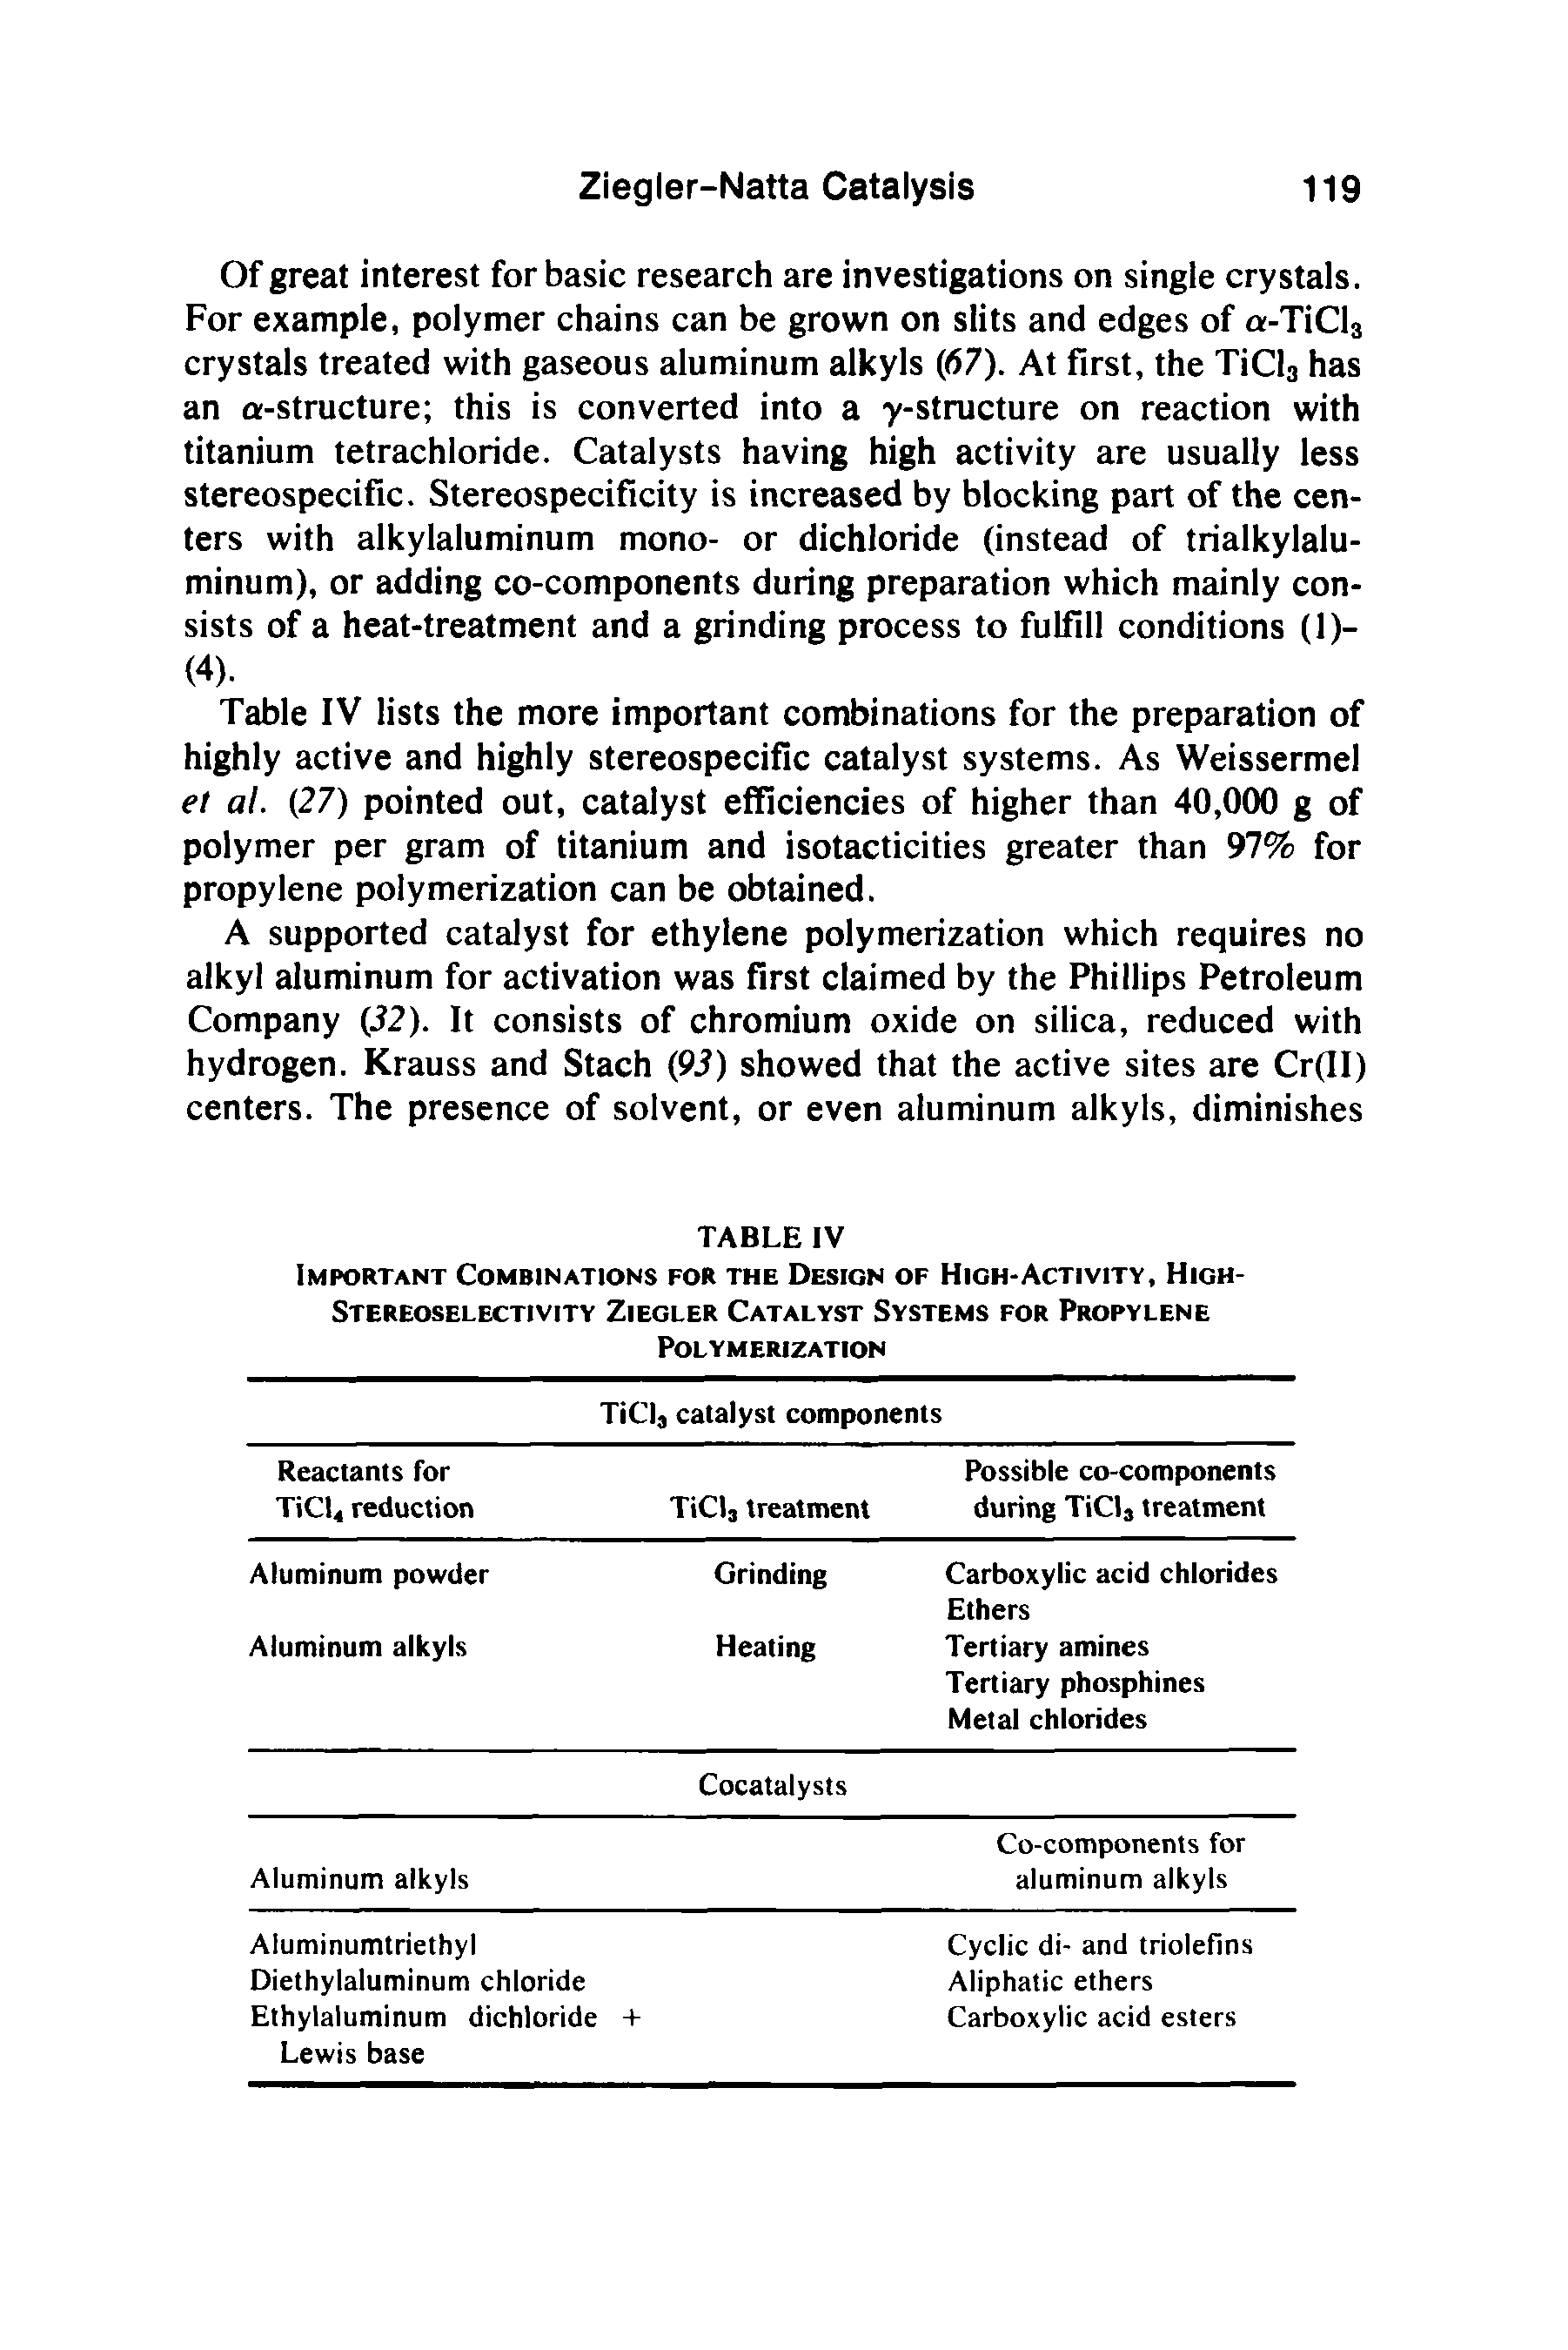 Table IV lists the more important combinations for the preparation of highly active and highly stereospecific catalyst systems. As Weissermel et at. (27) pointed out, catalyst efficiencies of higher than 40,000 g of polymer per gram of titanium and isotacticities greater than 97% for propylene polymerization can be obtained.